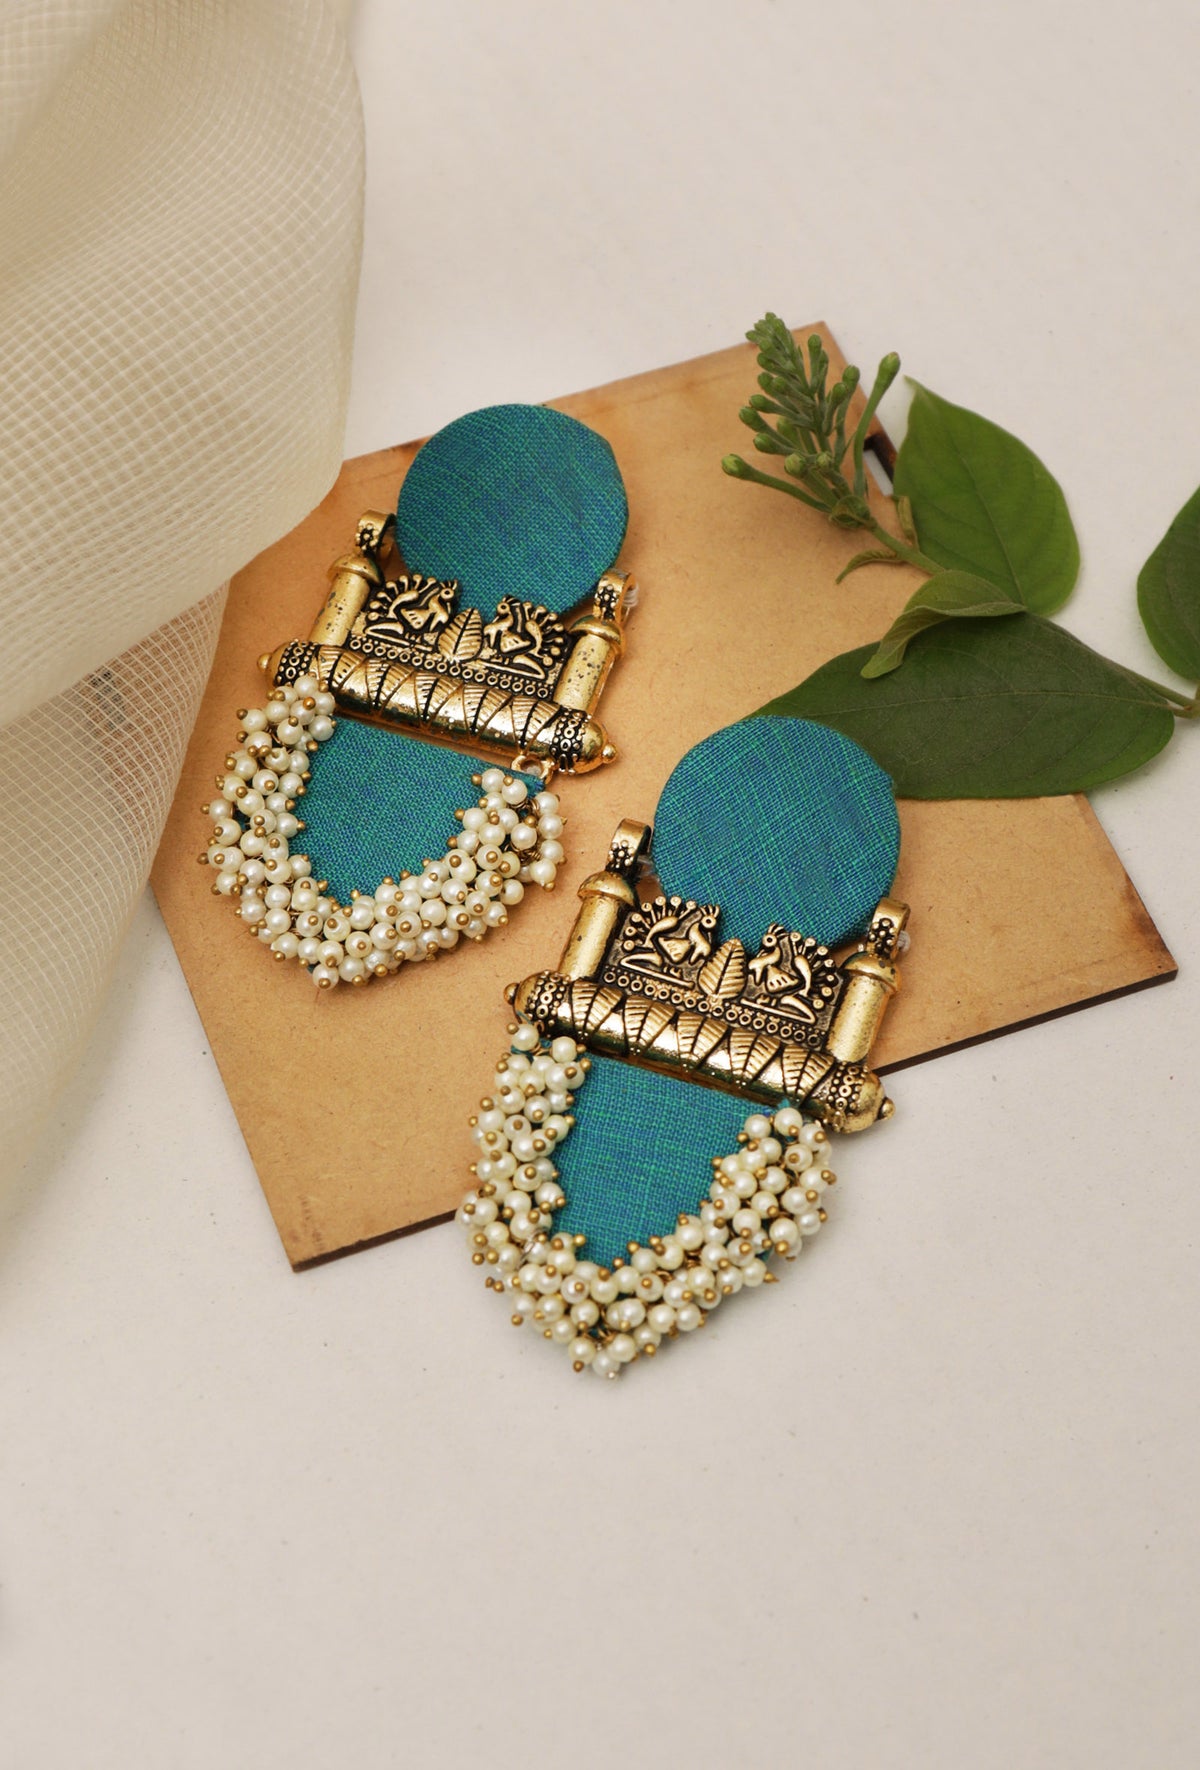 Handcrafted Fabric Peacock Style Earrings